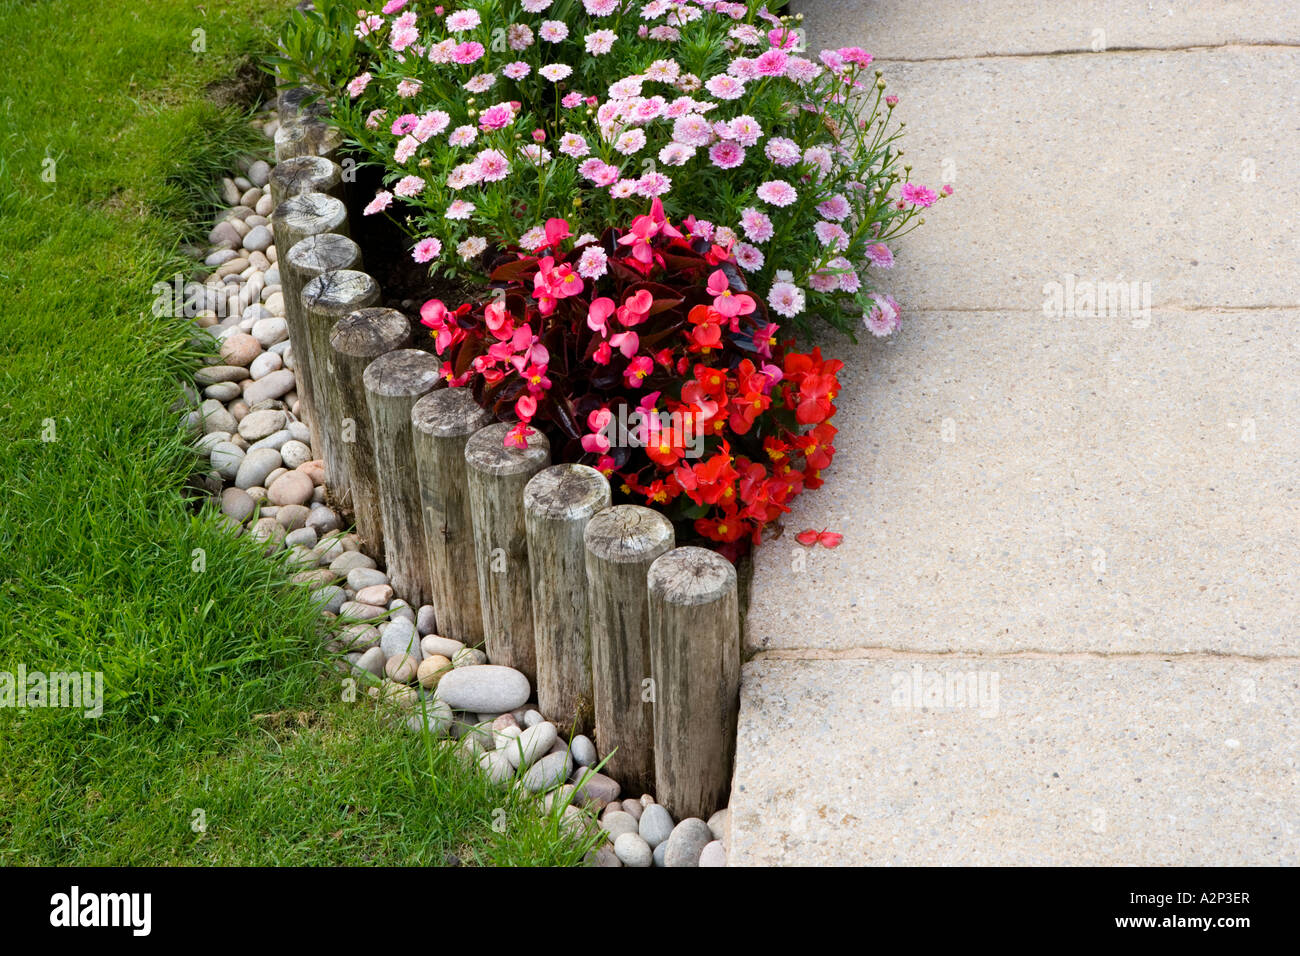 Wooden posts edging a flower bed with begonia Stock Photo